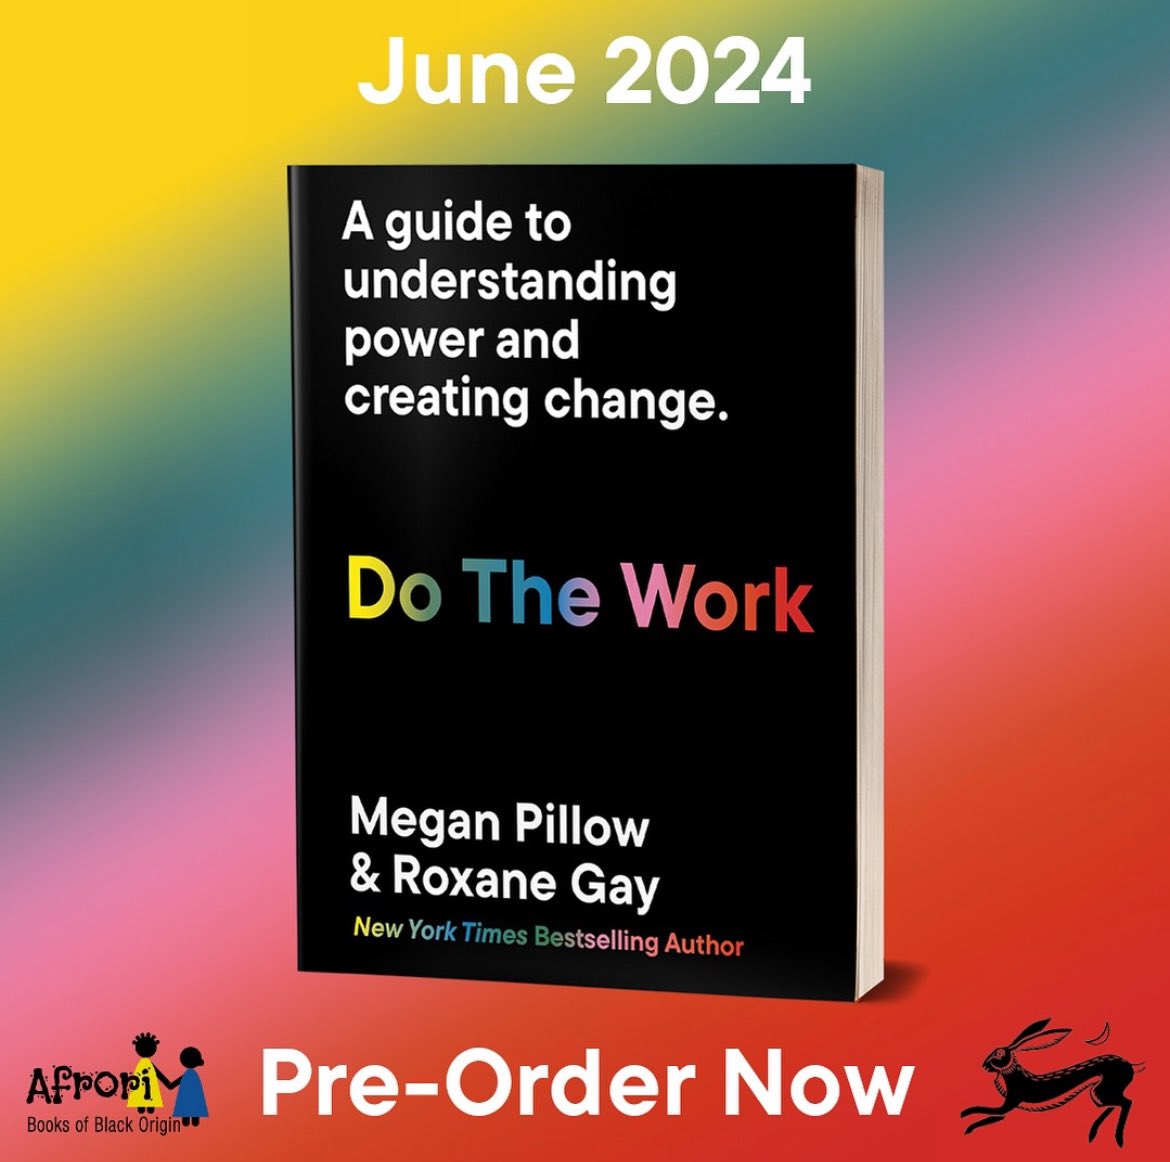 UK friends: my publishers @LeapingHareBks and Quarto Books UK are partnering with @AfroriBooks for UK preorders of DO THE WORK. If you’re preordering our UK release, please do so through the UK’s biggest supplier of books by Black authors! Link in the thread!